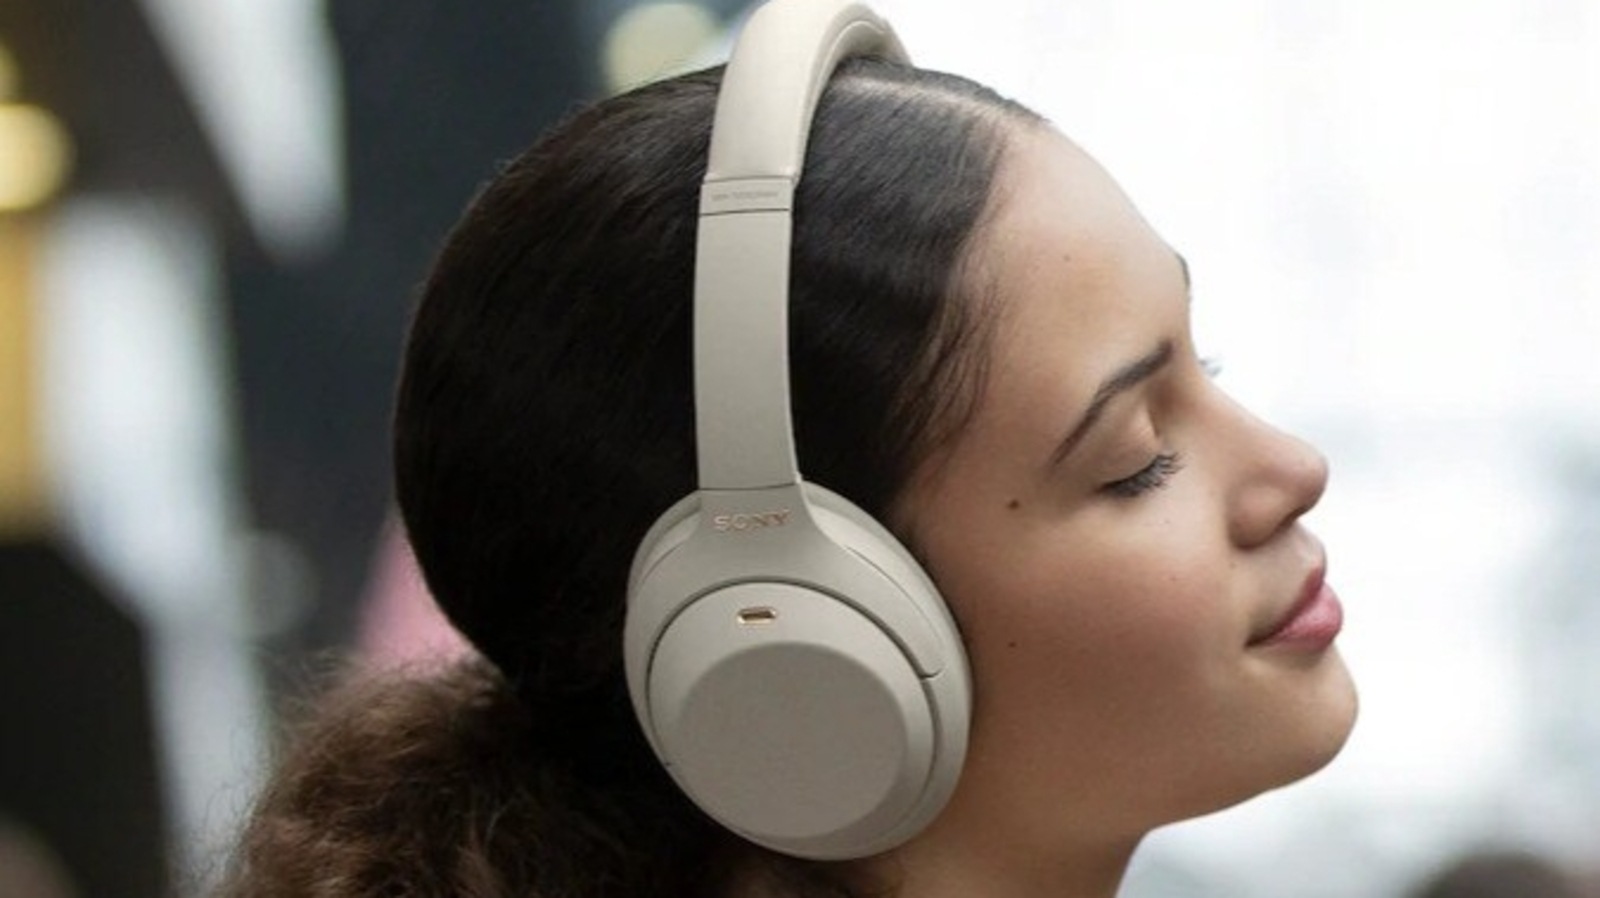 Newest Sony headphones, WH-1000XM5, launched | Wearables News